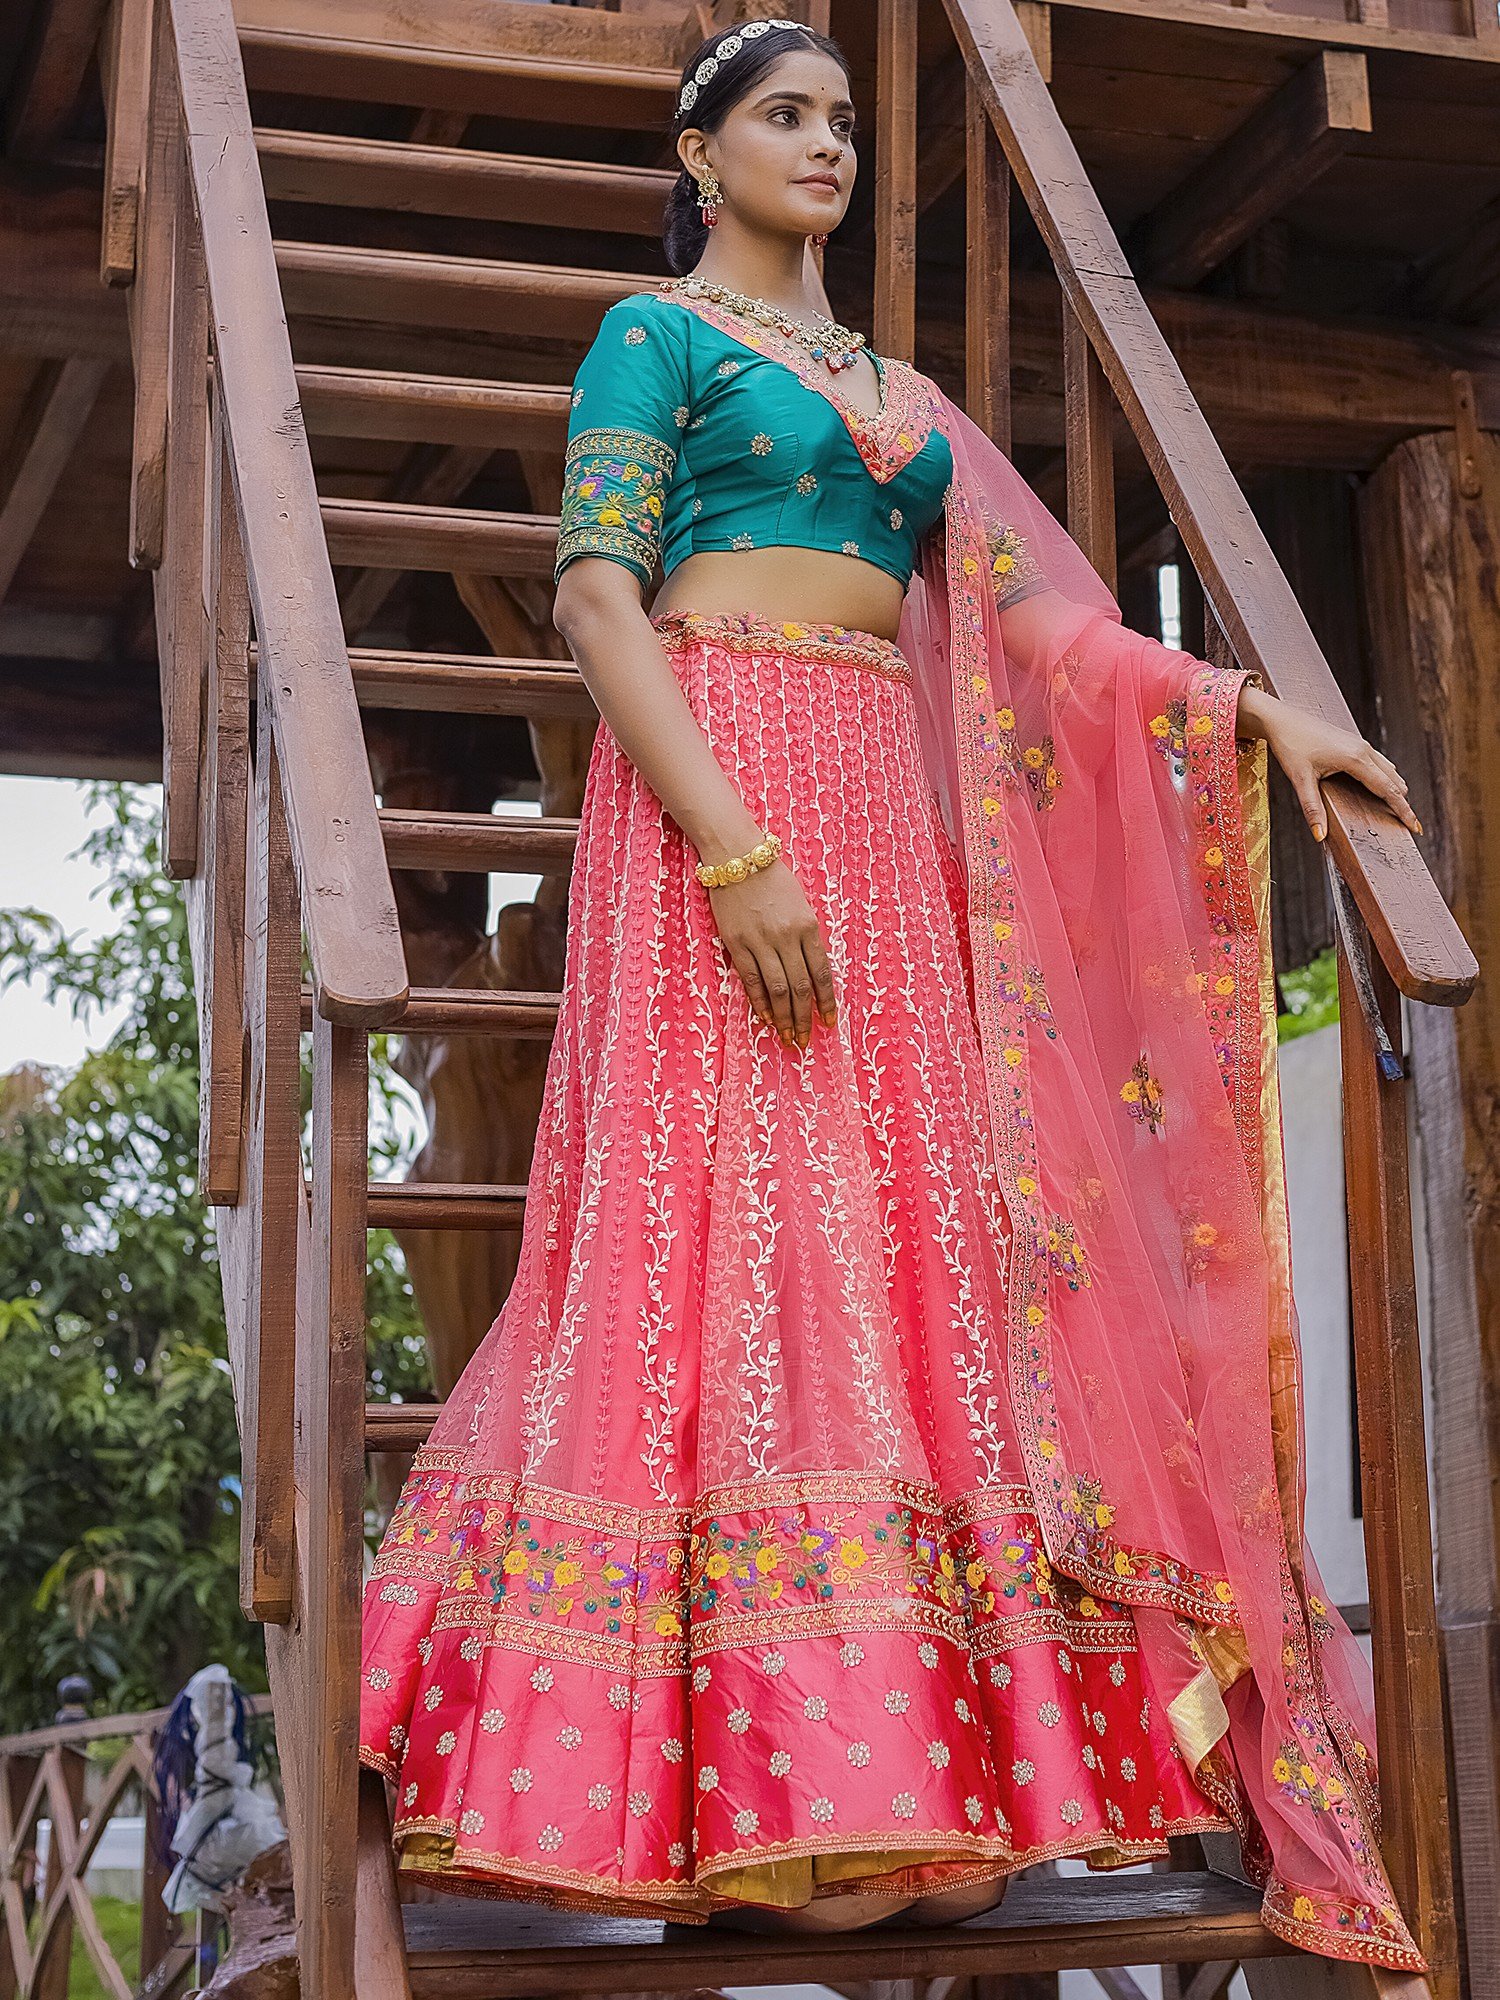 Photo of Offbeat bridal lehenga in pink with turquoise blouse